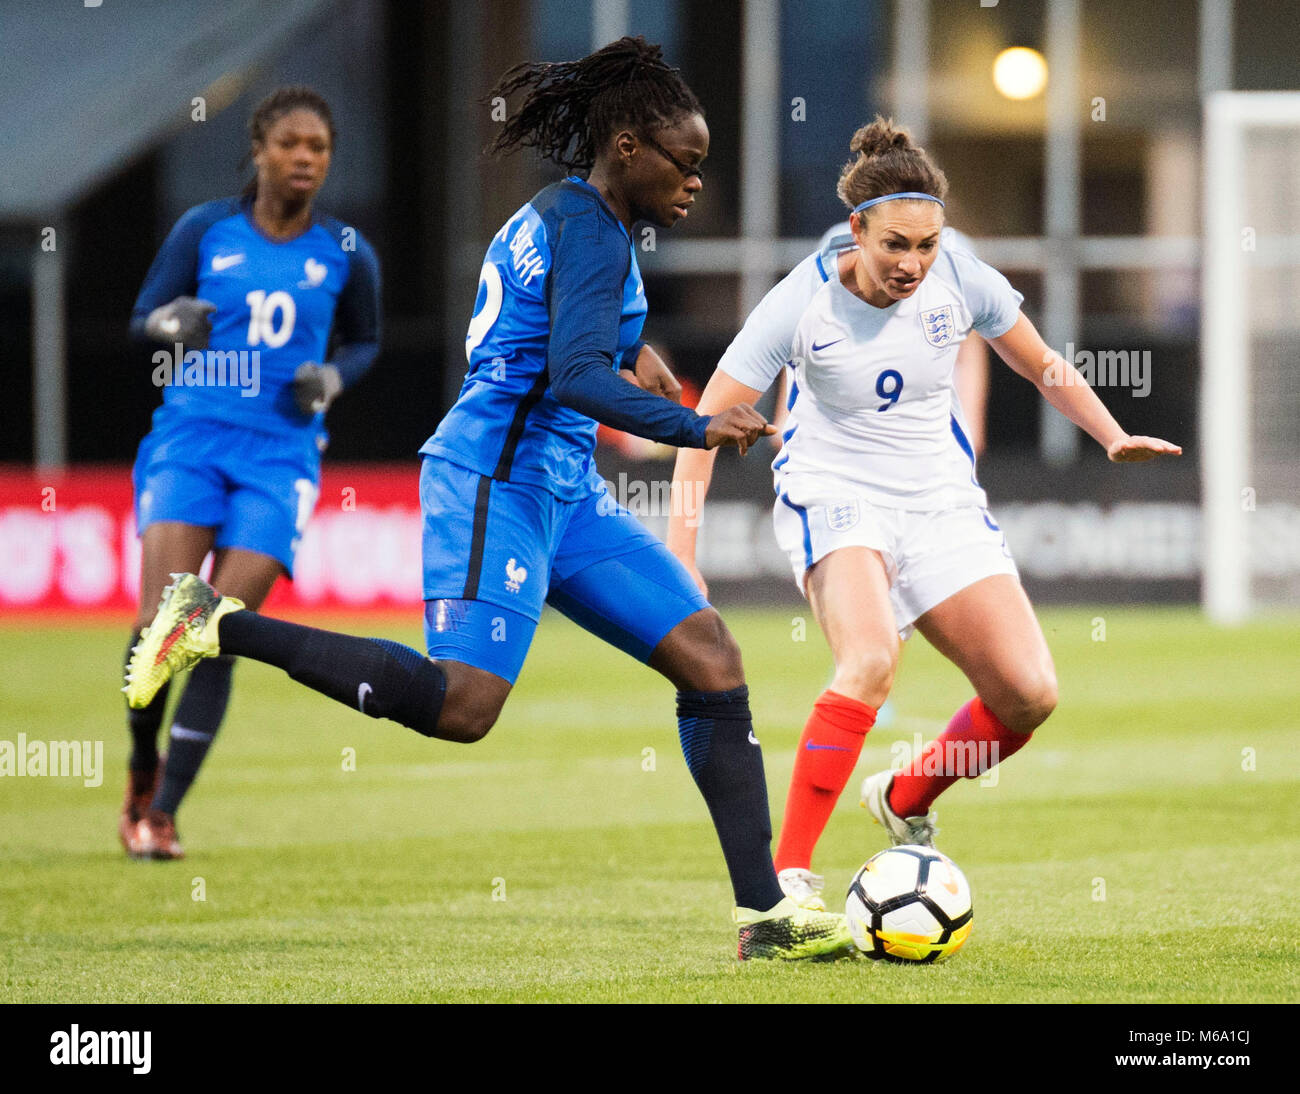 Columbus, Ohio, USA. March 1, 2018:  England forward Jodie Taylor (9) fights for the ball against France forward Ouleymata Sarr (11) during their match at the SheBelieves Cup in Columbus, Ohio, USA. Brent Clark/Alamy Live  News Stock Photo